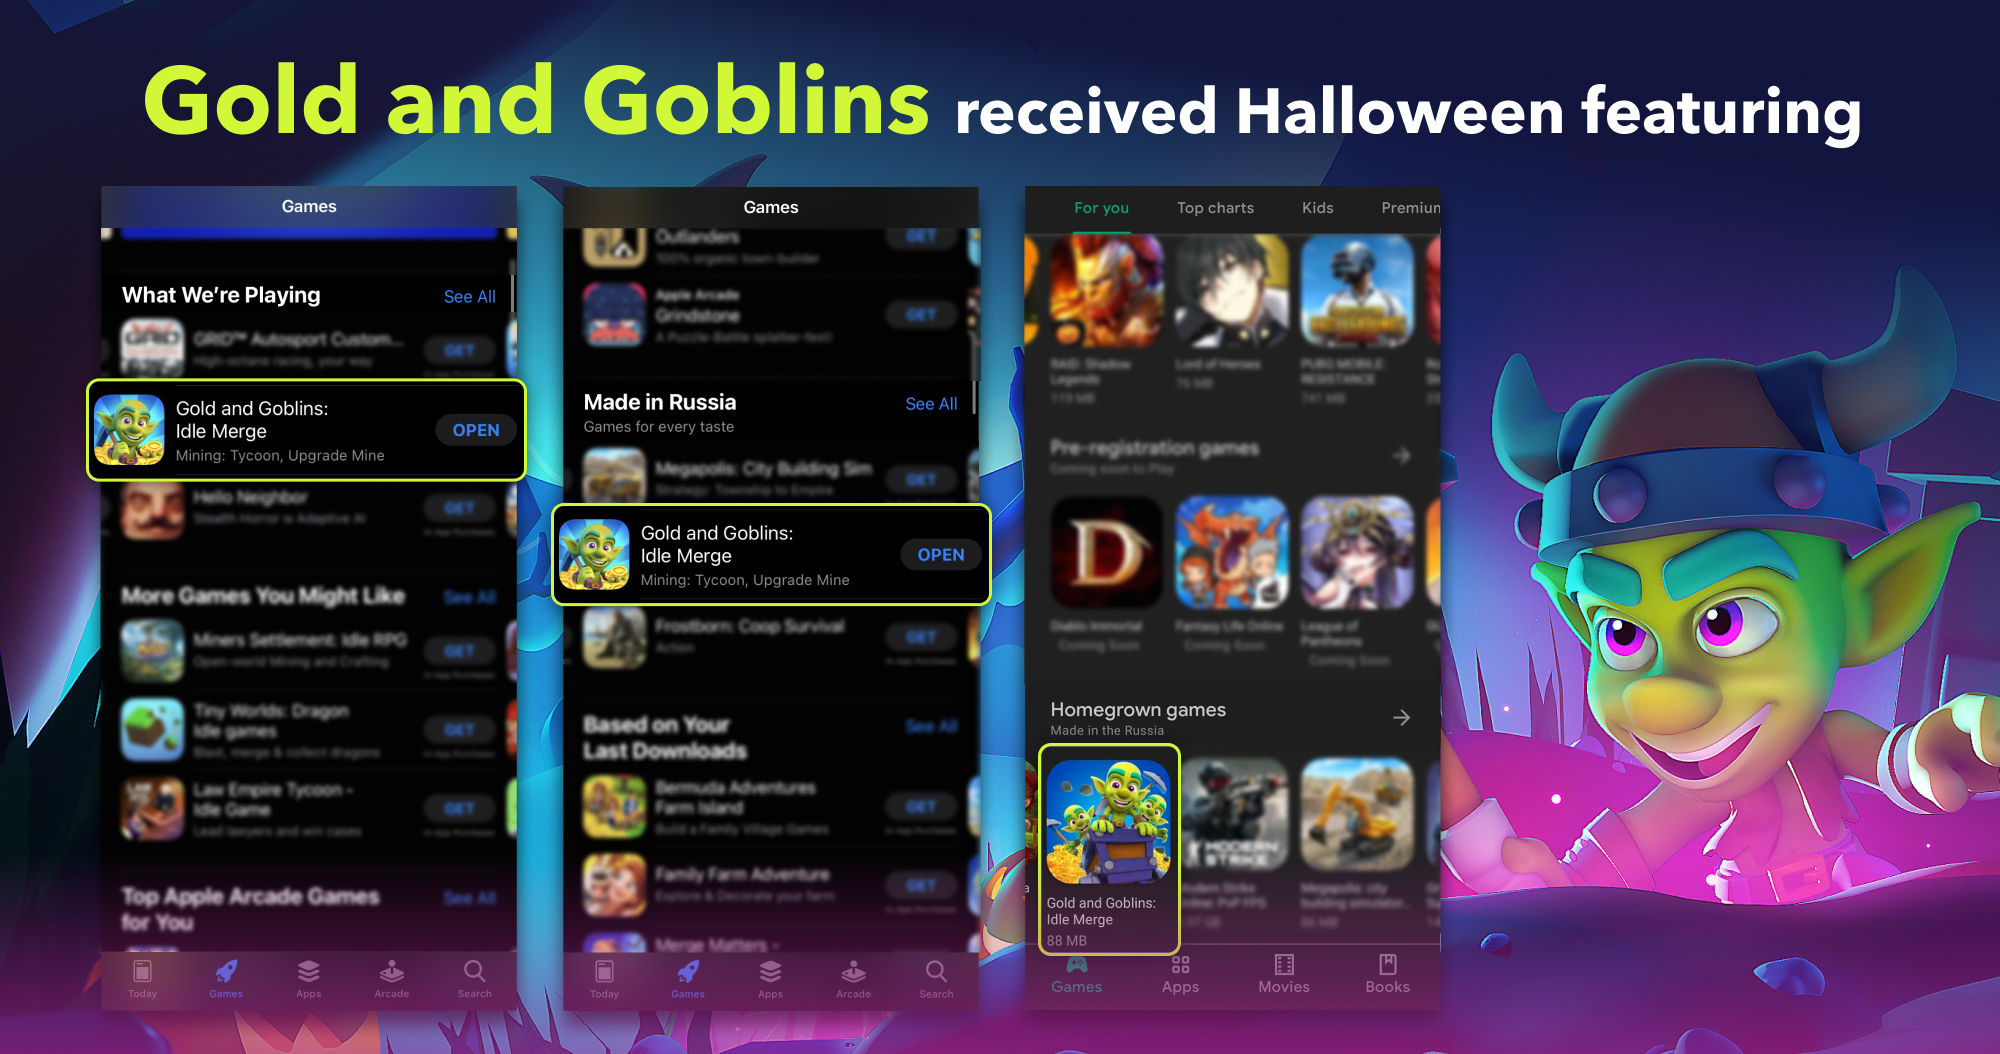 Gold and Goblins Received Halloween Featuring